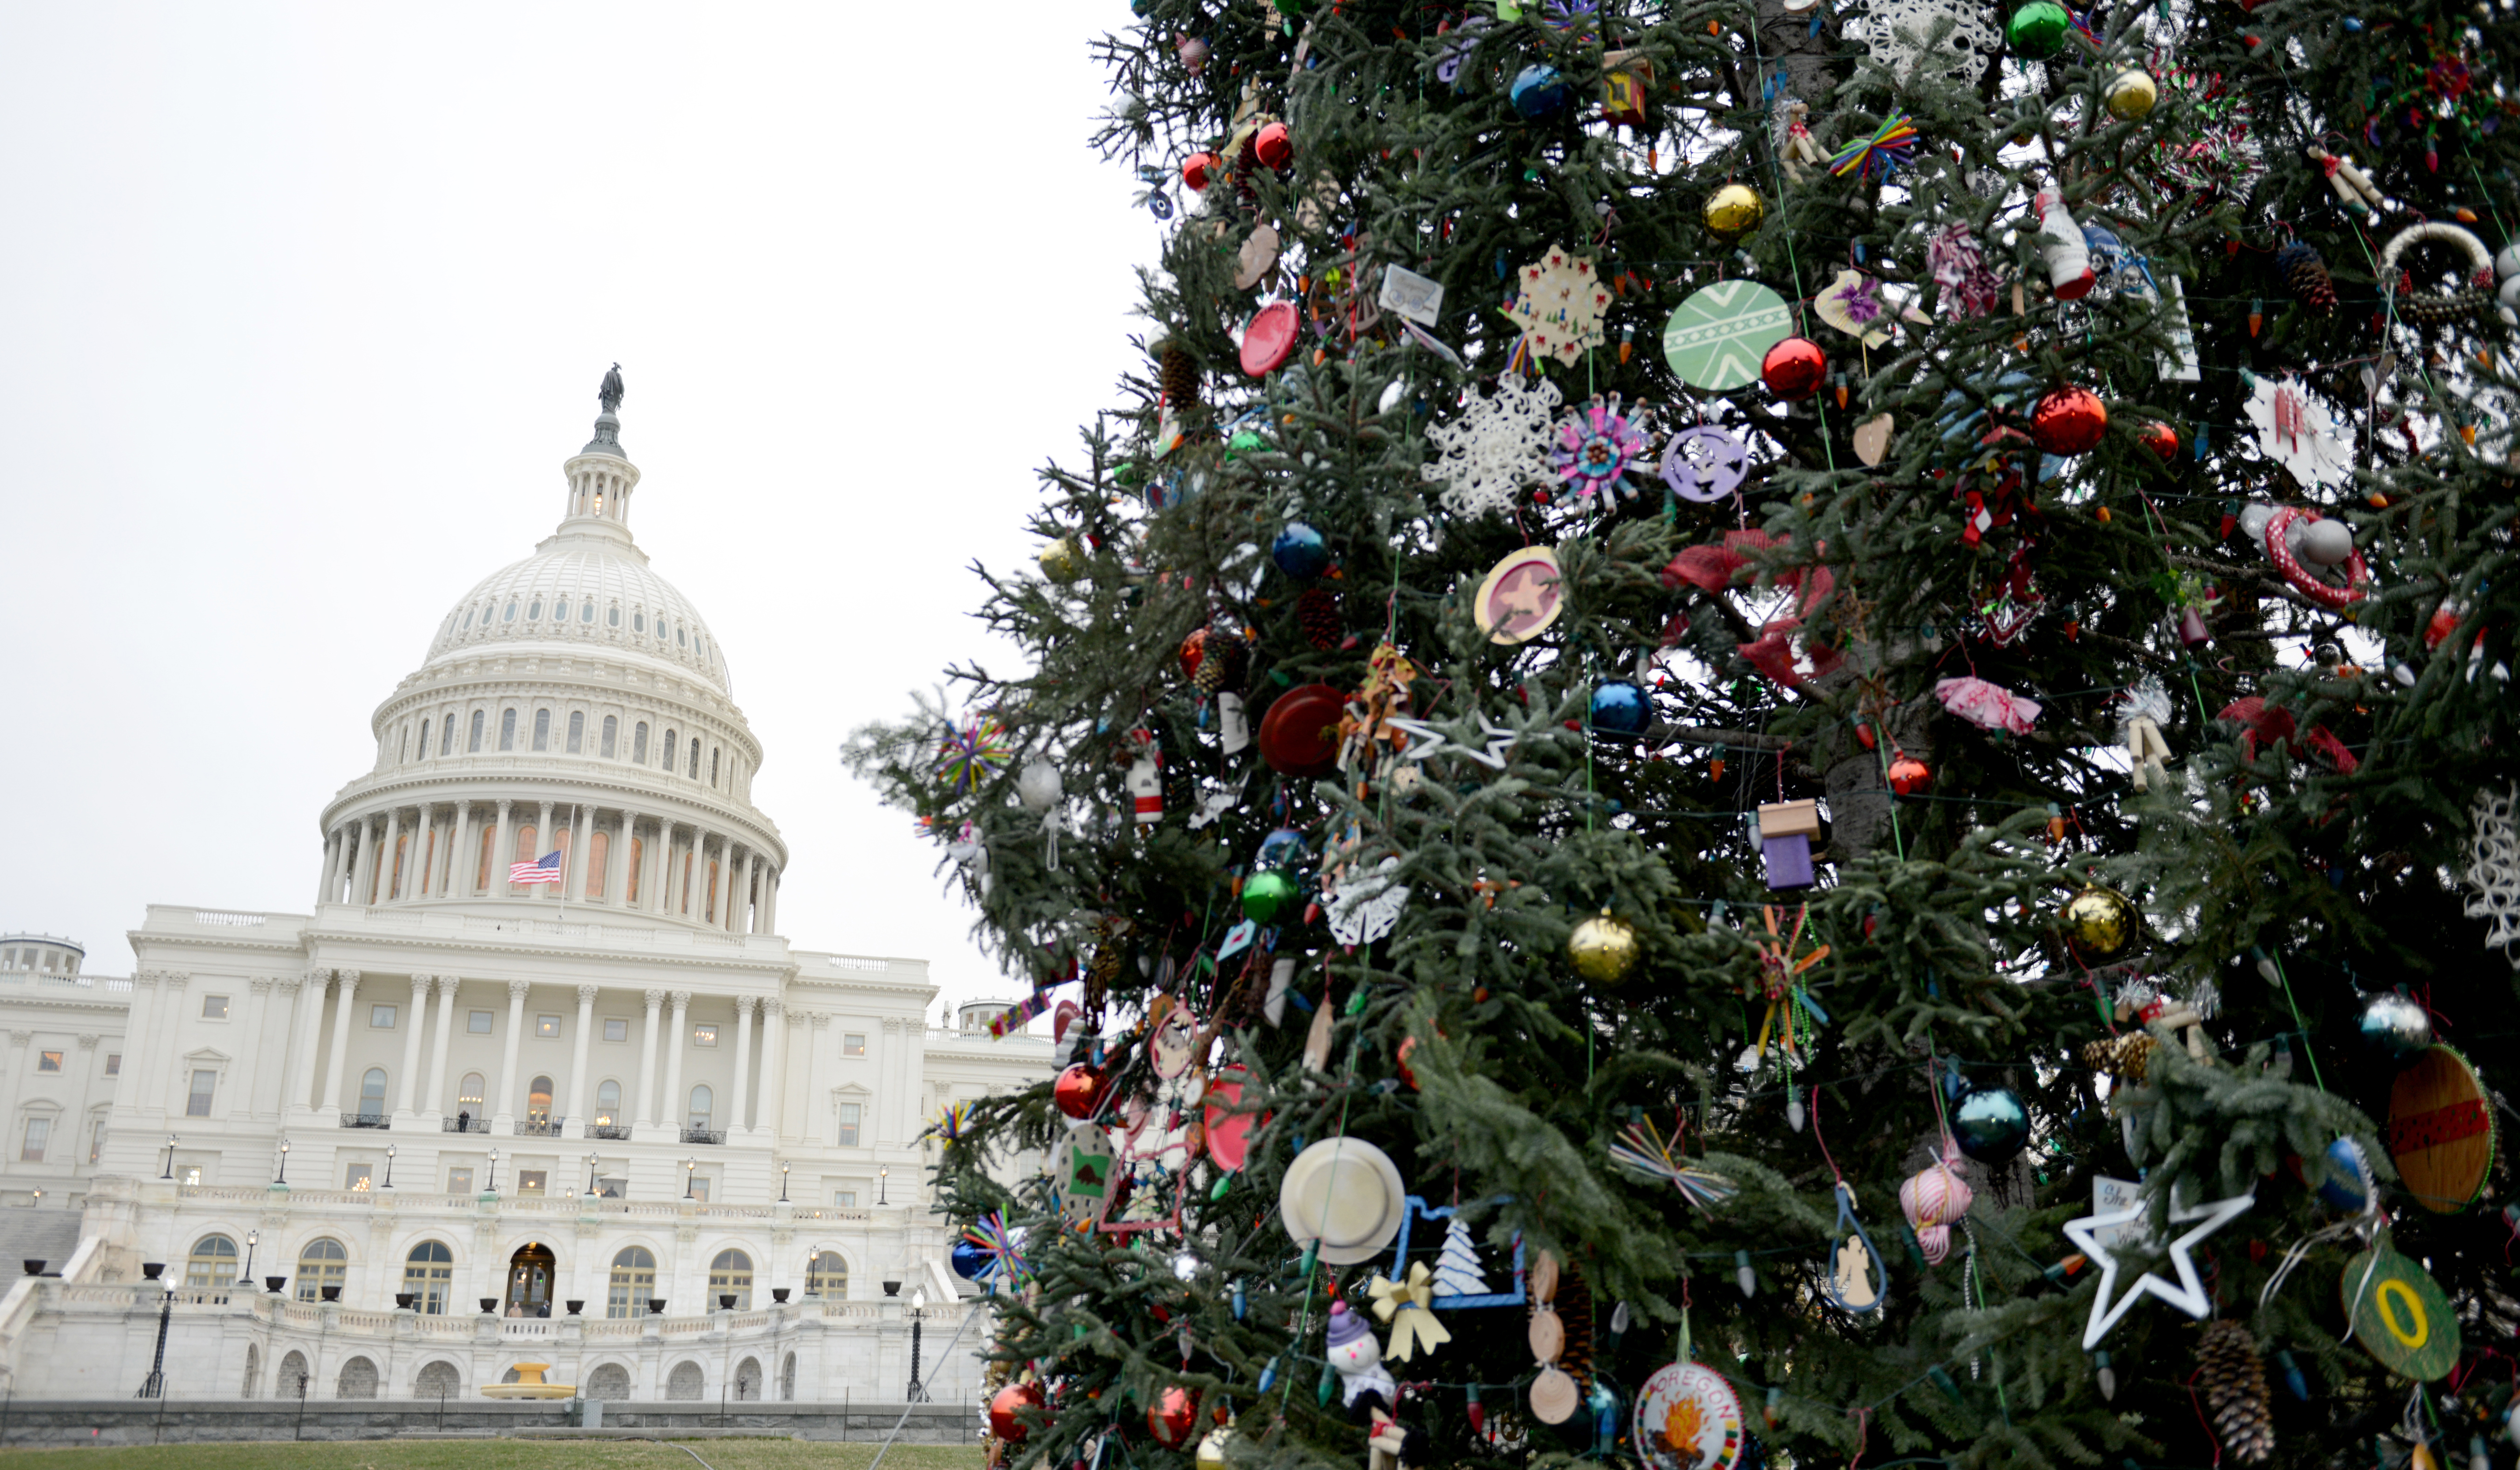 Close-up of ornaments on the Capitol Tree